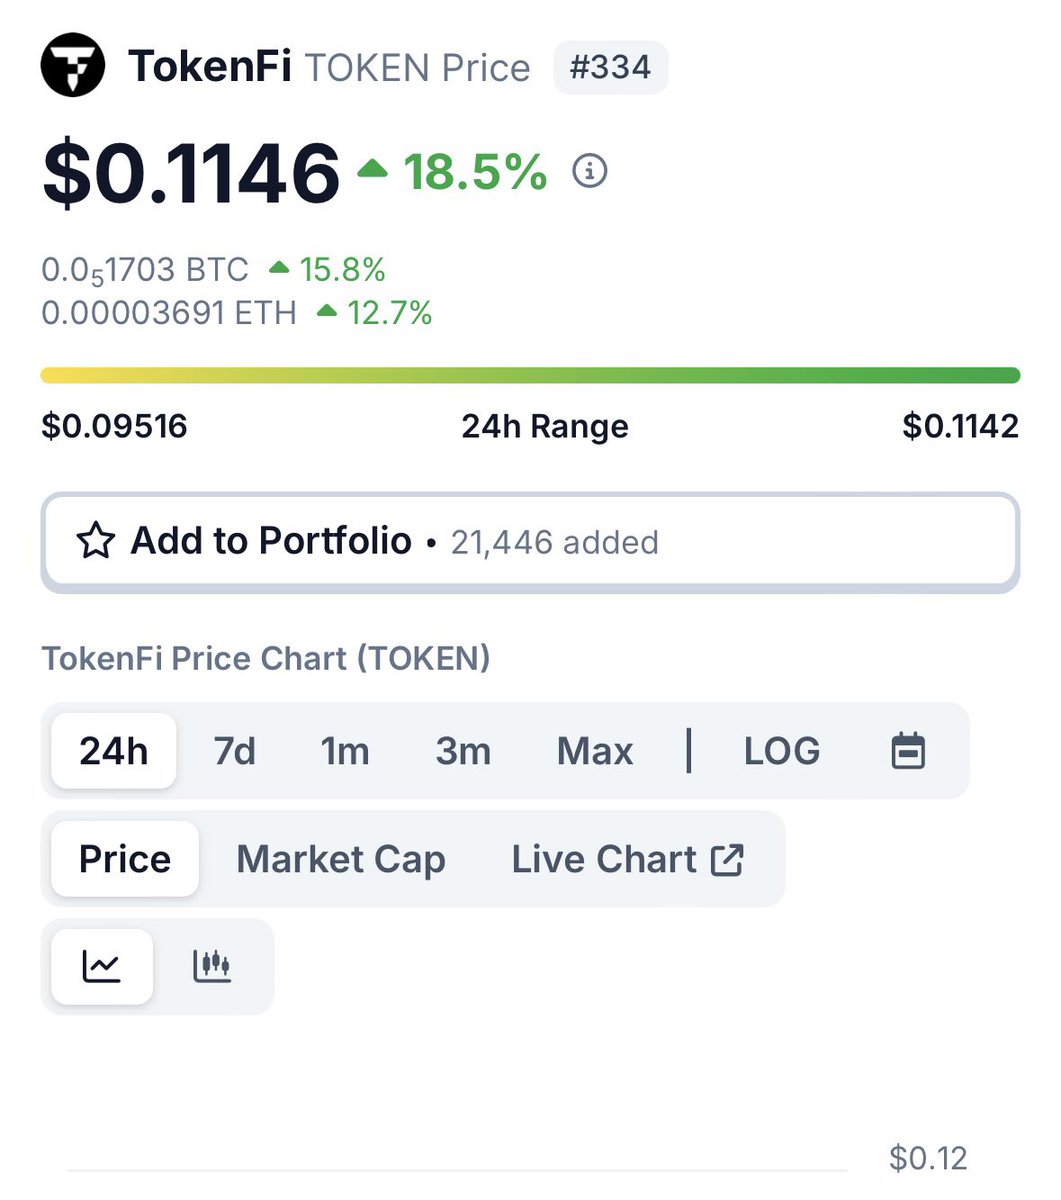 #TOKENFI LED by the #FLOKI TEAM is UP 18% today. Amazing project at only $111 Million Market Cap. BUY NOW 🤩